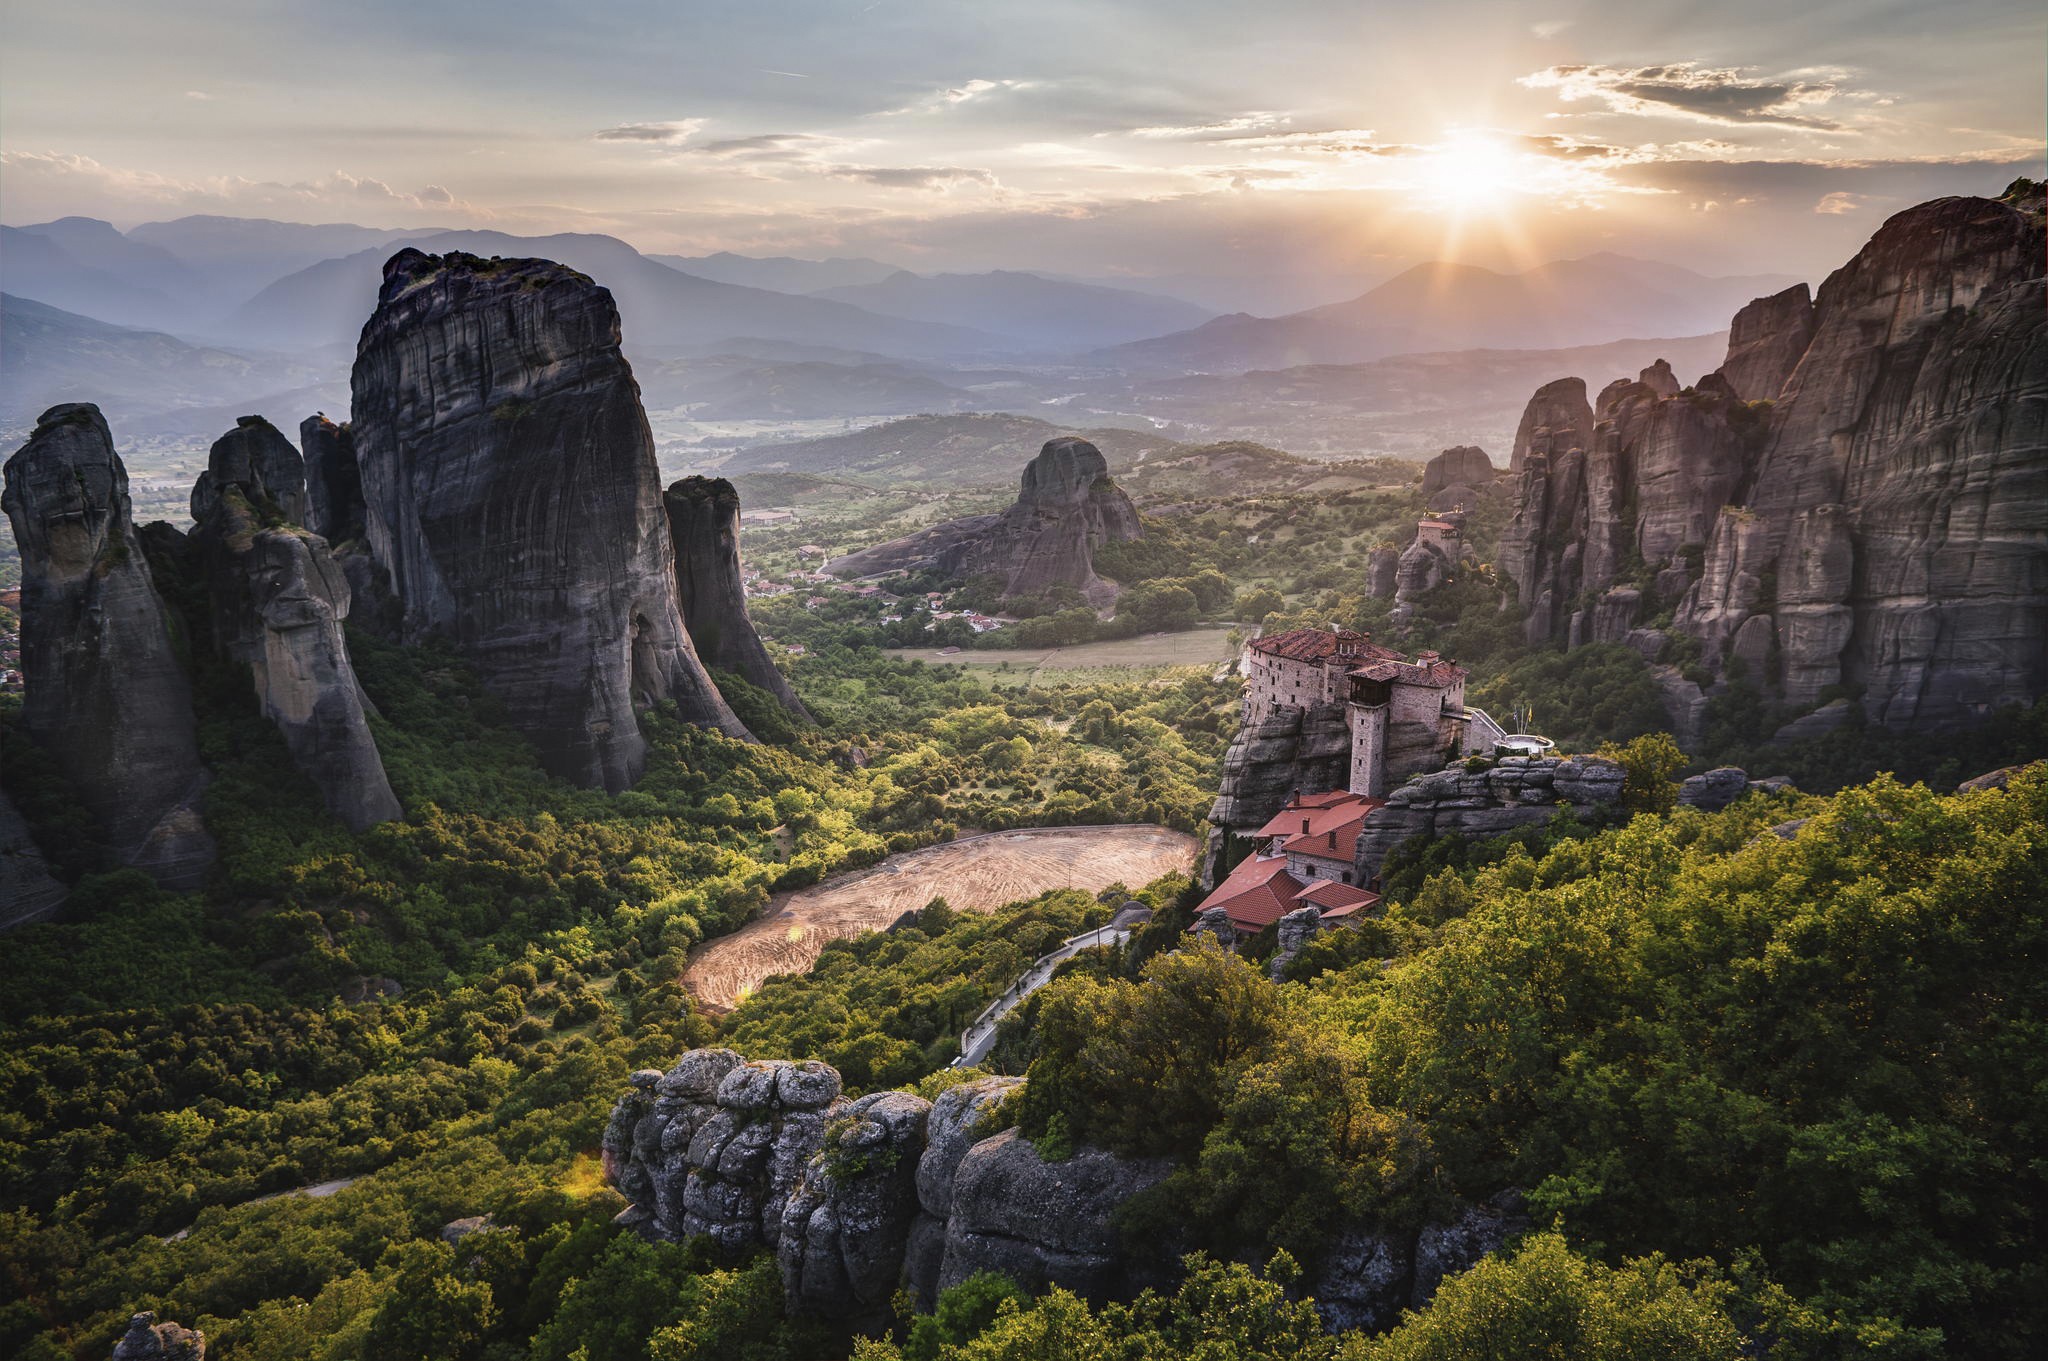 General 2048x1361 Greece nature monastery Meteora landscape cliff mountains